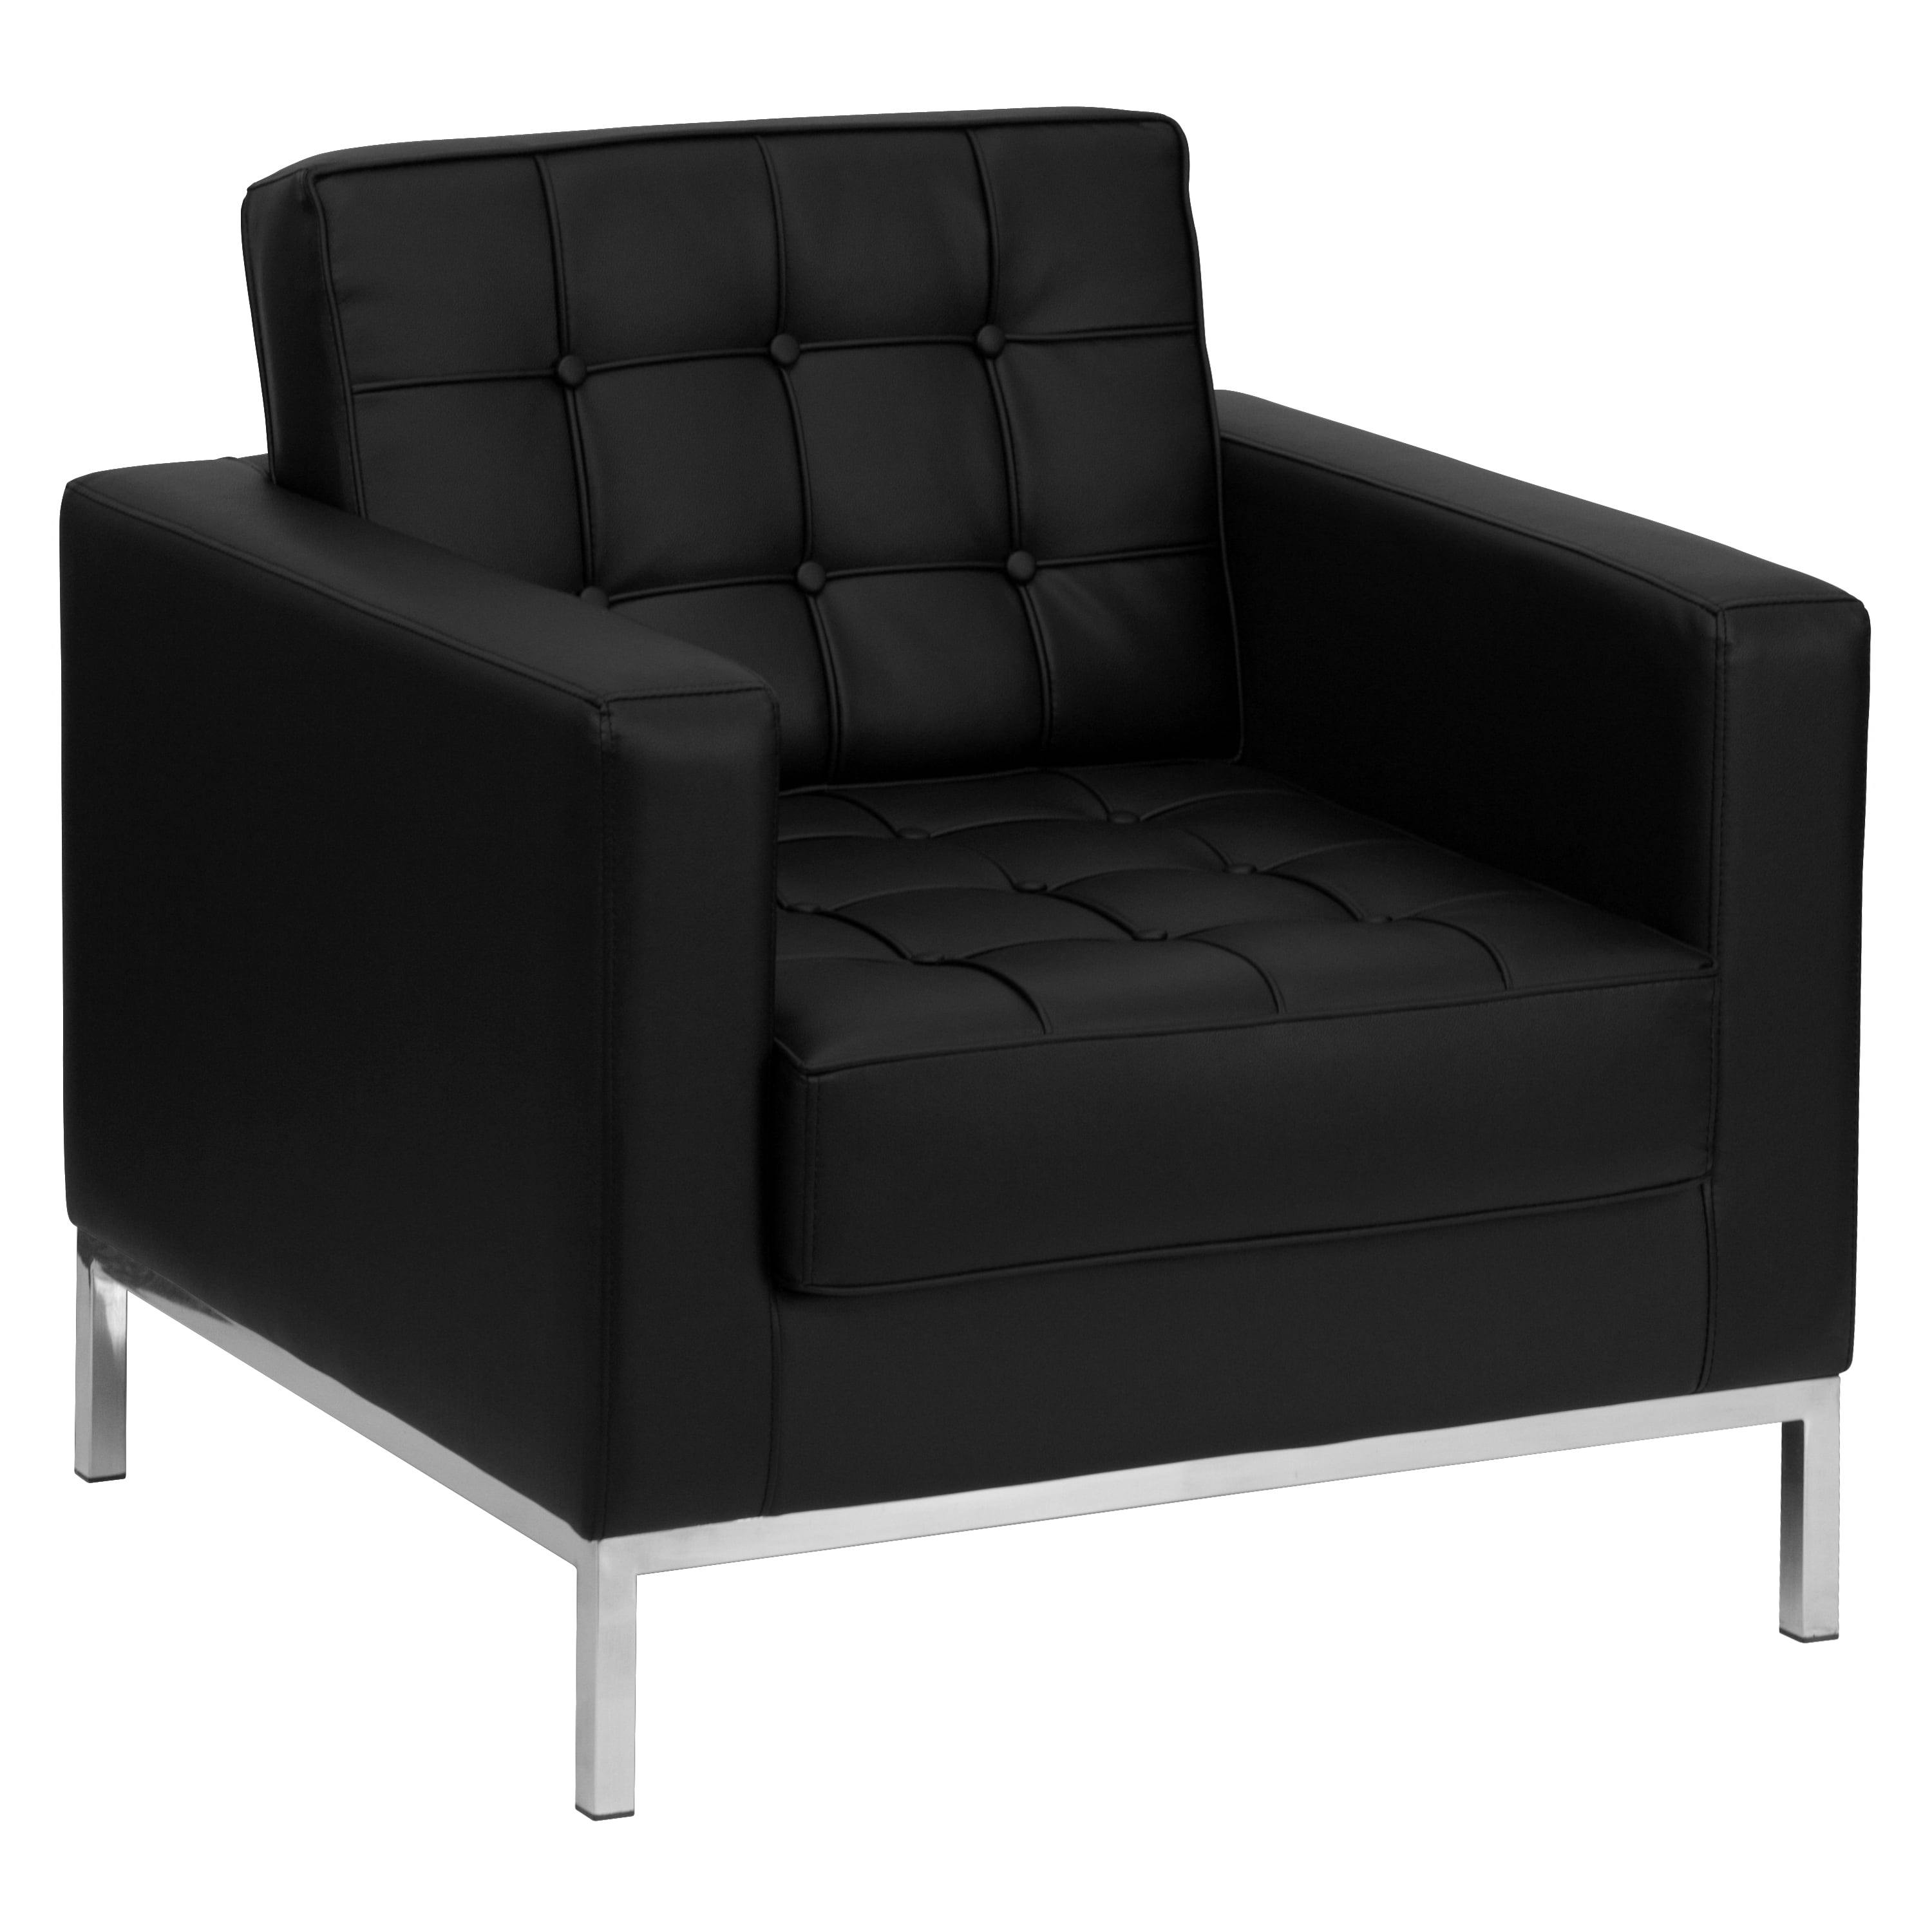 Prague Modern Black LeatherSoft Lounge Chair with Stainless Steel Frame